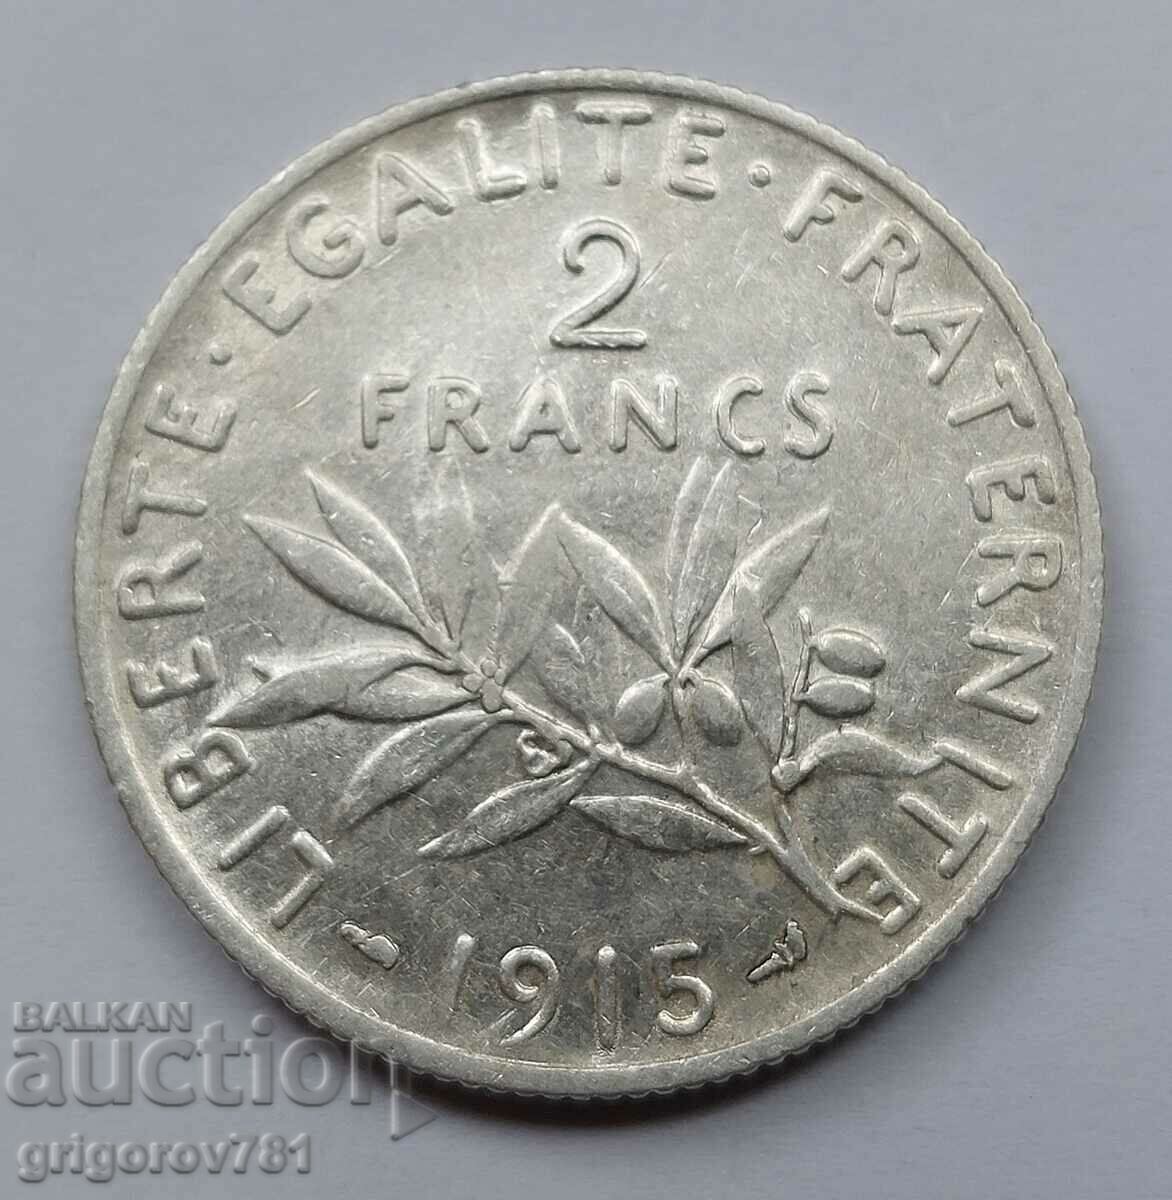 2 Francs Silver France 1915 - Silver Coin #122